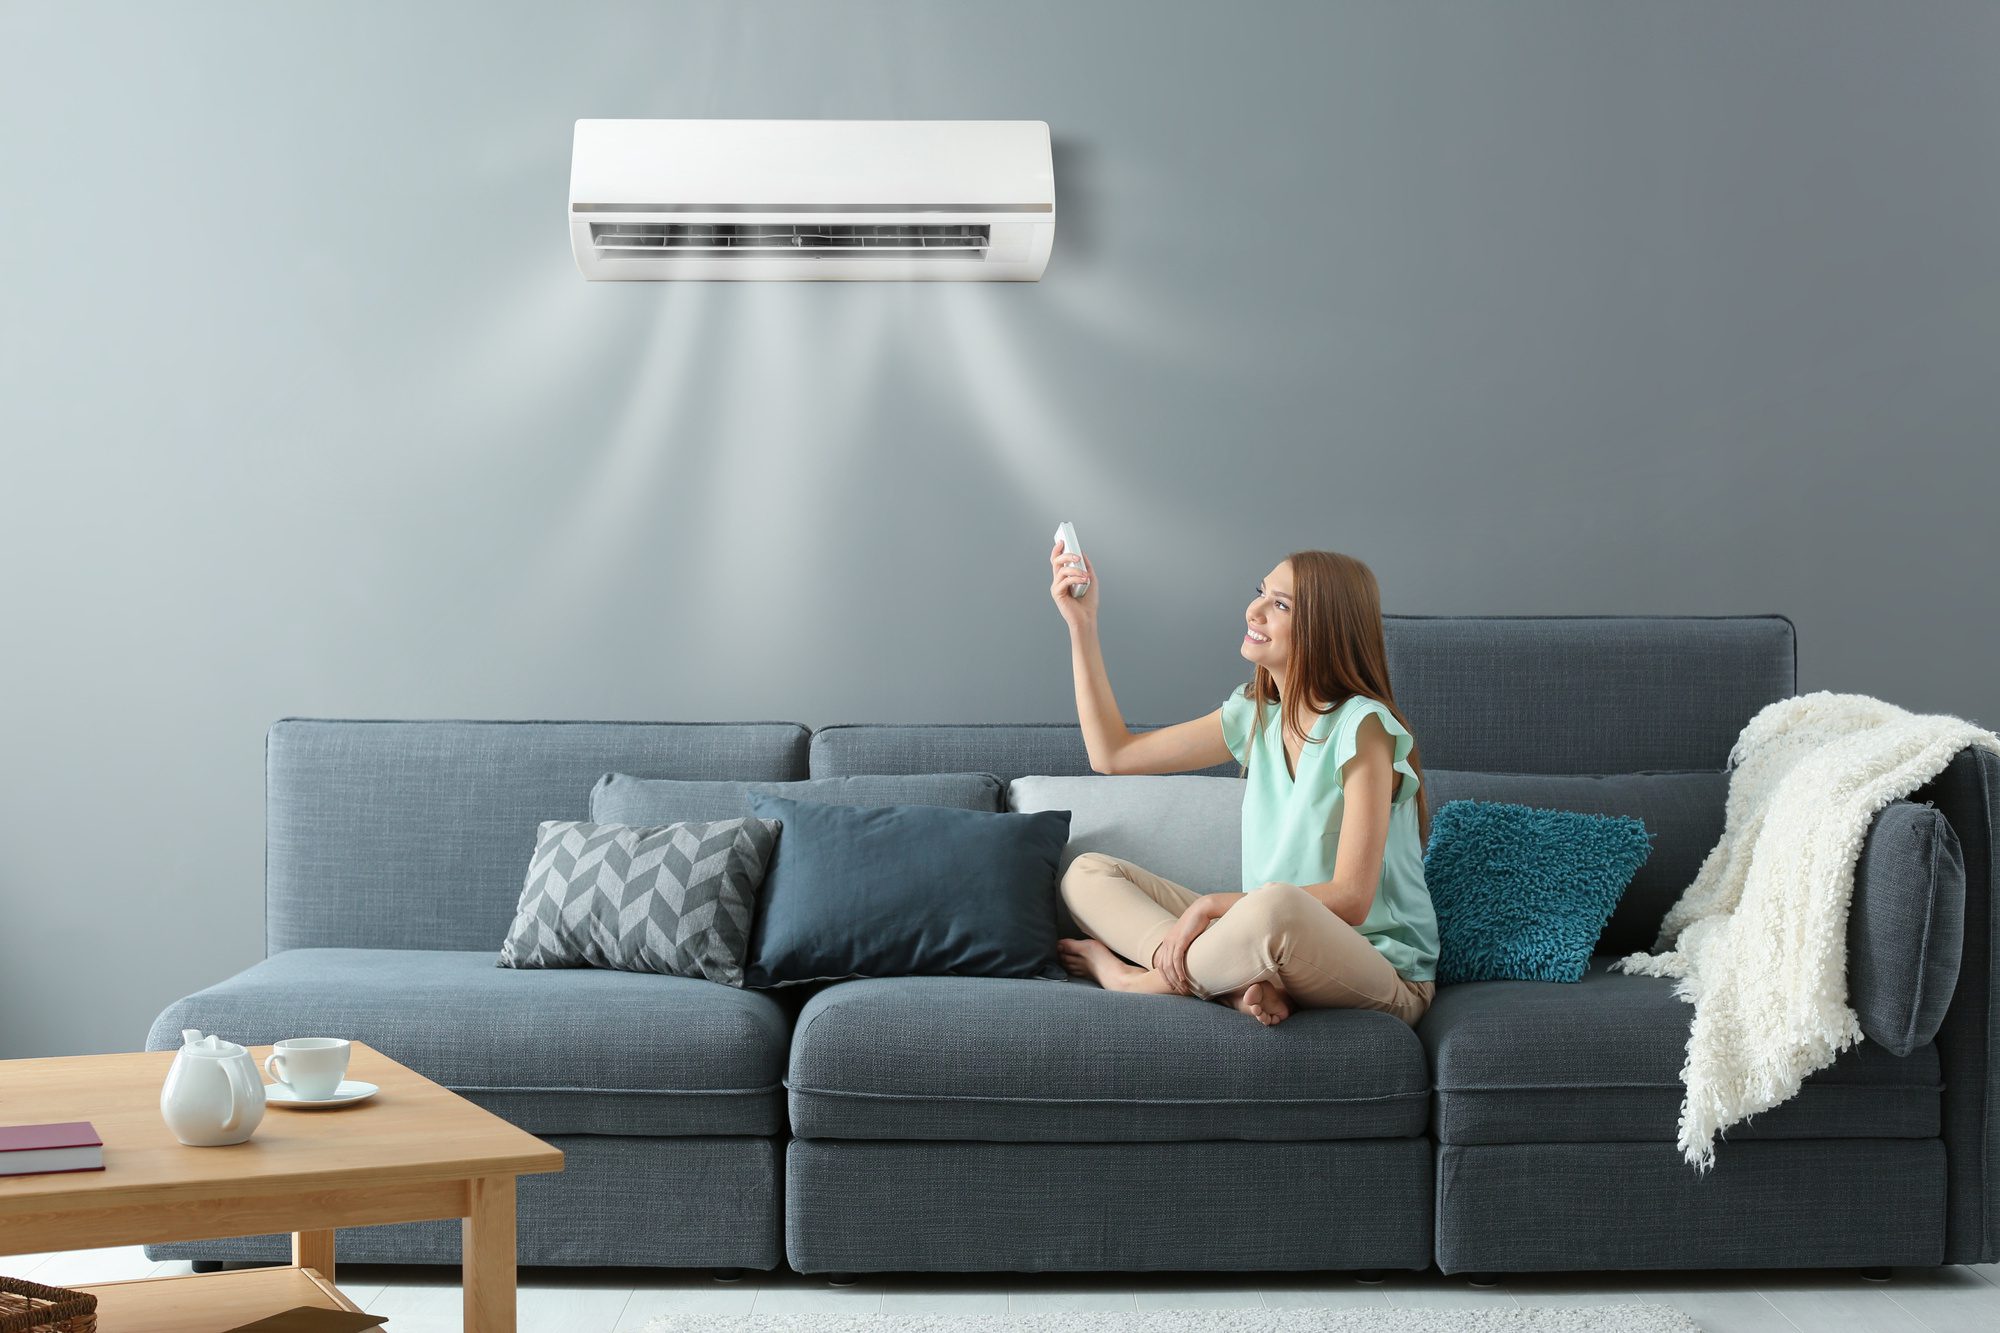 Air Conditioning Tips: 7 Big Air Conditioner Mistakes to Avoid